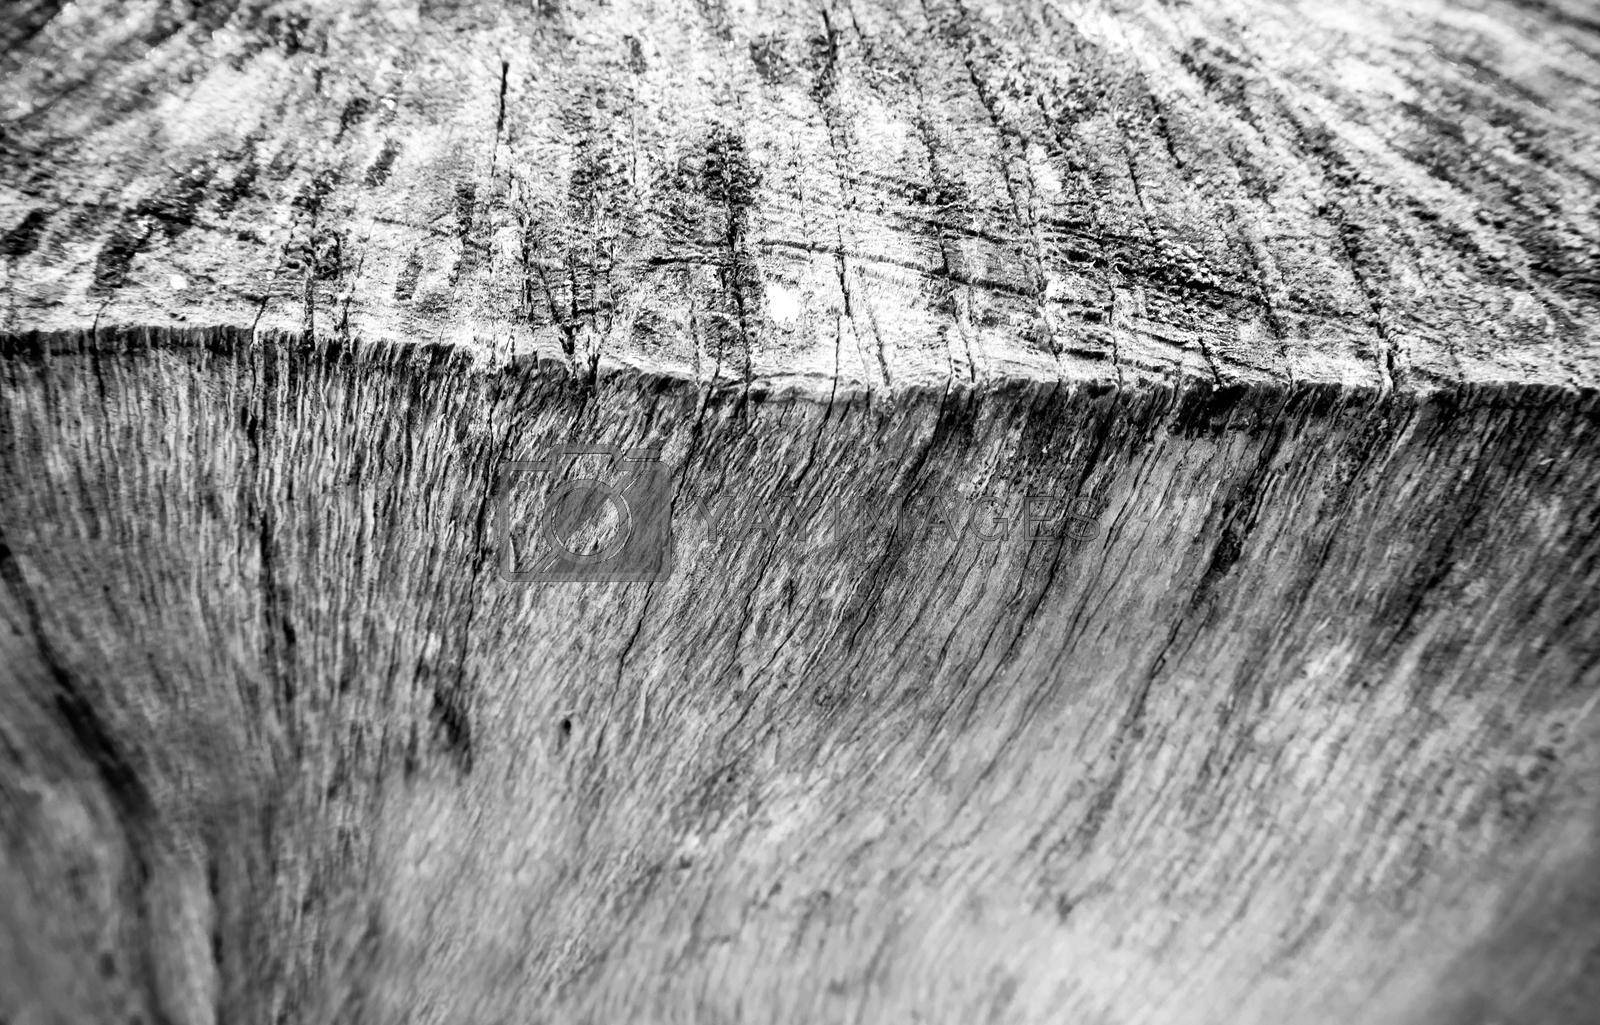 Detail of old stump surface, Texture of old stump wood surface